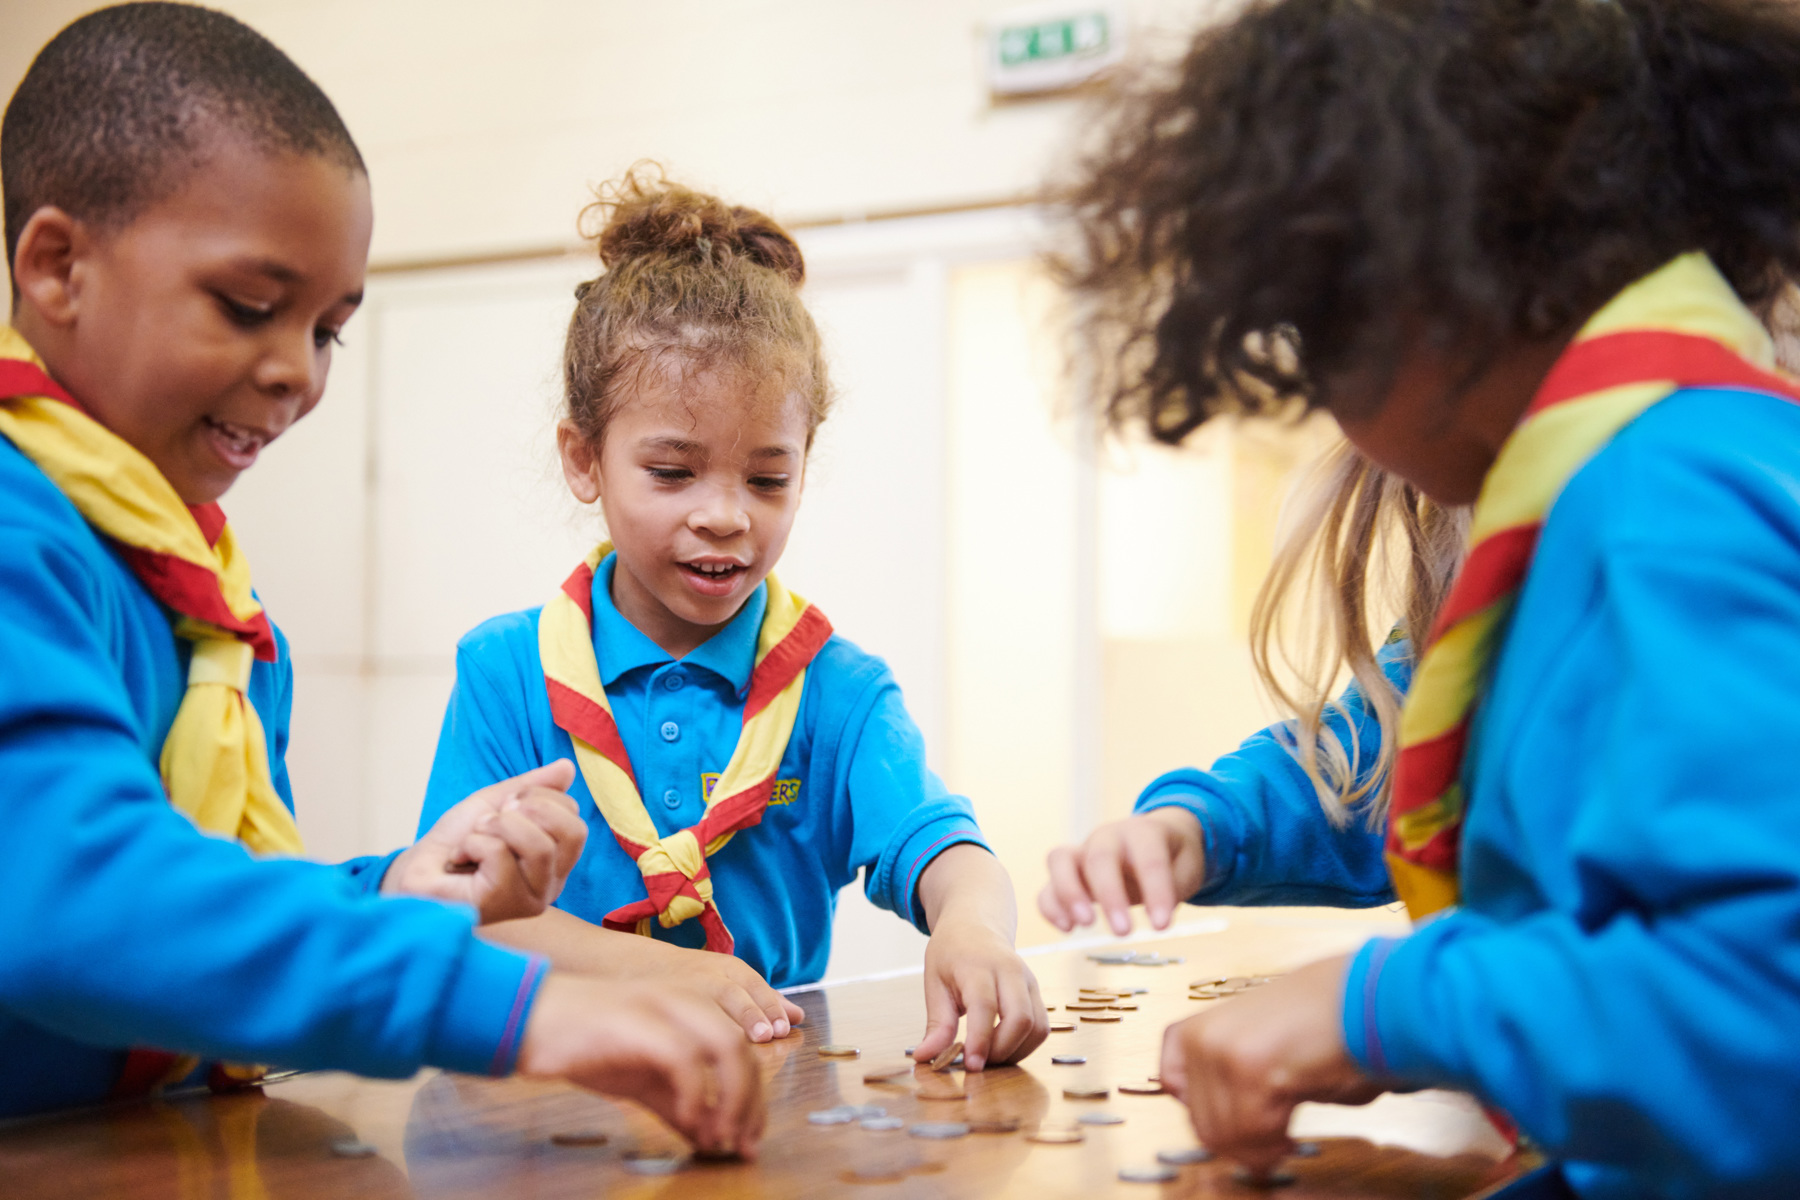 Three children in Beavers uniform and neckers are stood around a table, concentrating on laying out coins.